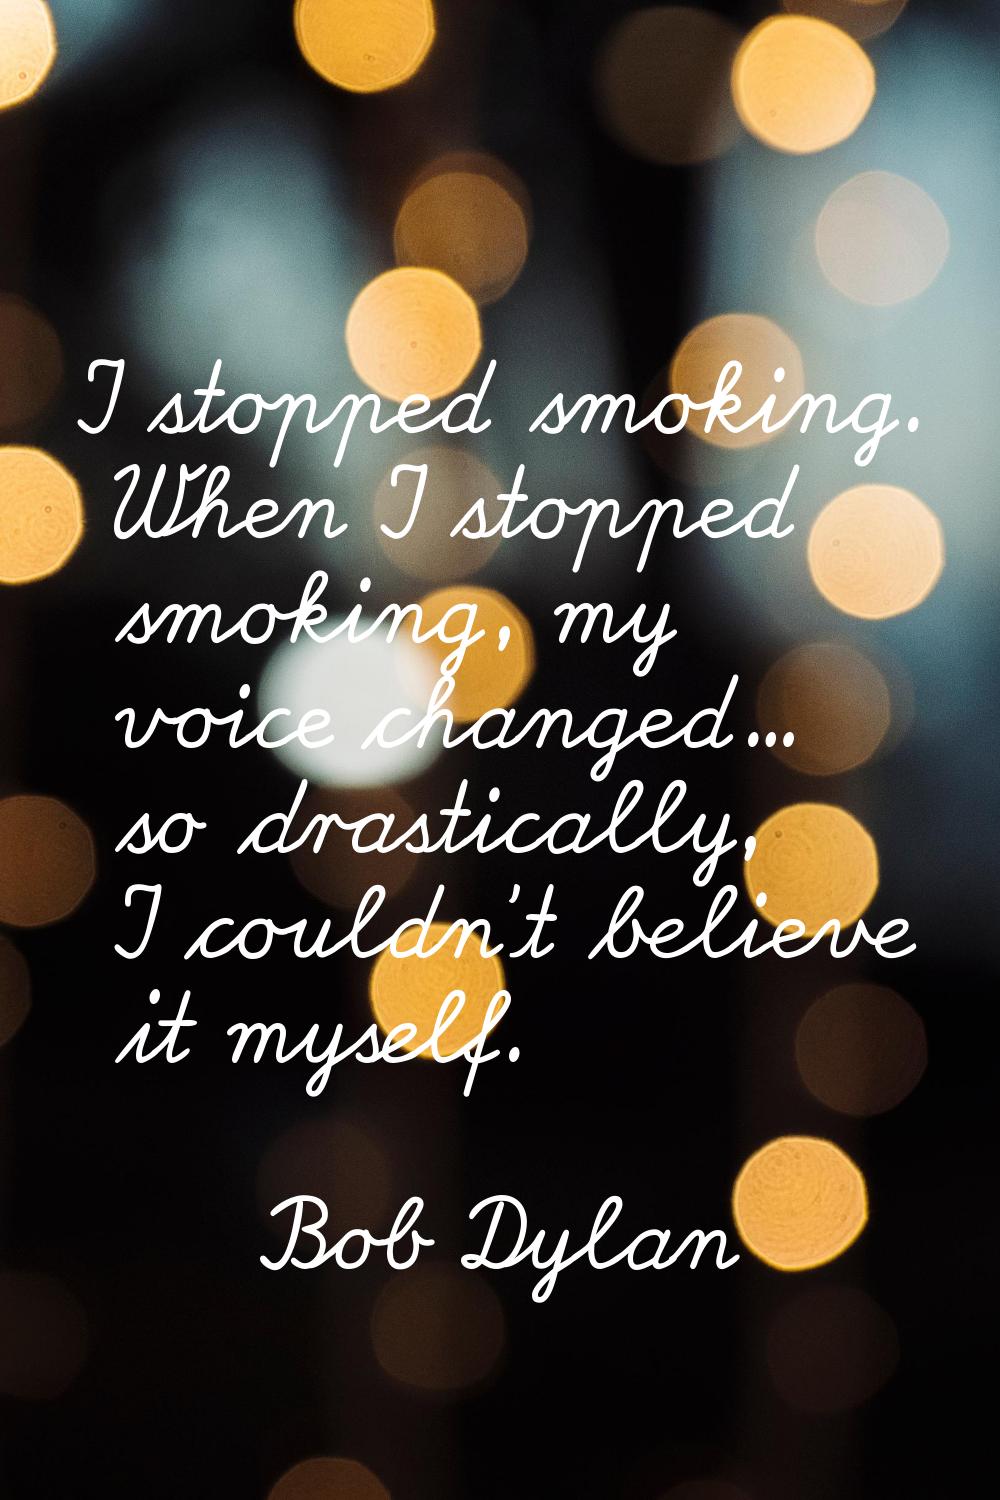 I stopped smoking. When I stopped smoking, my voice changed... so drastically, I couldn't believe i